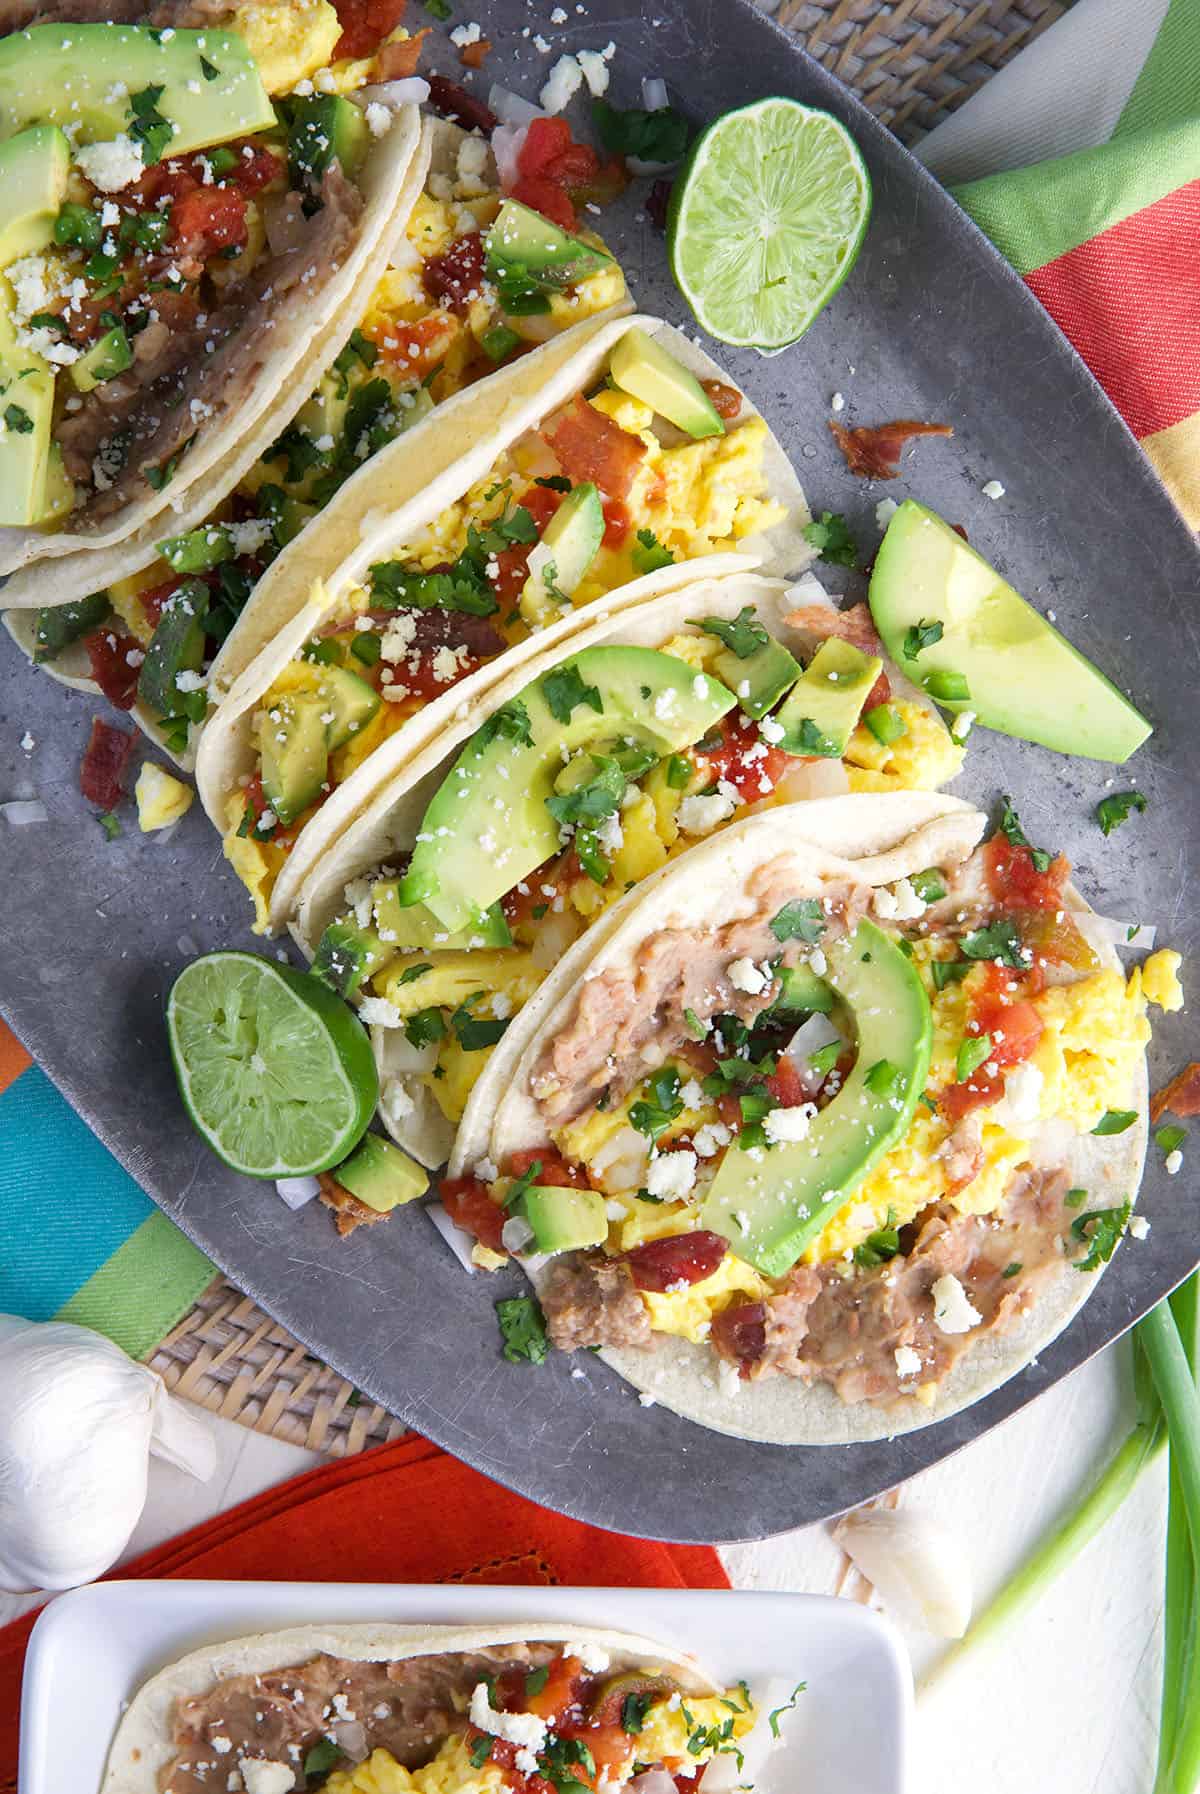 A plate full of breakfast tacos is presented next to some cut up limes.